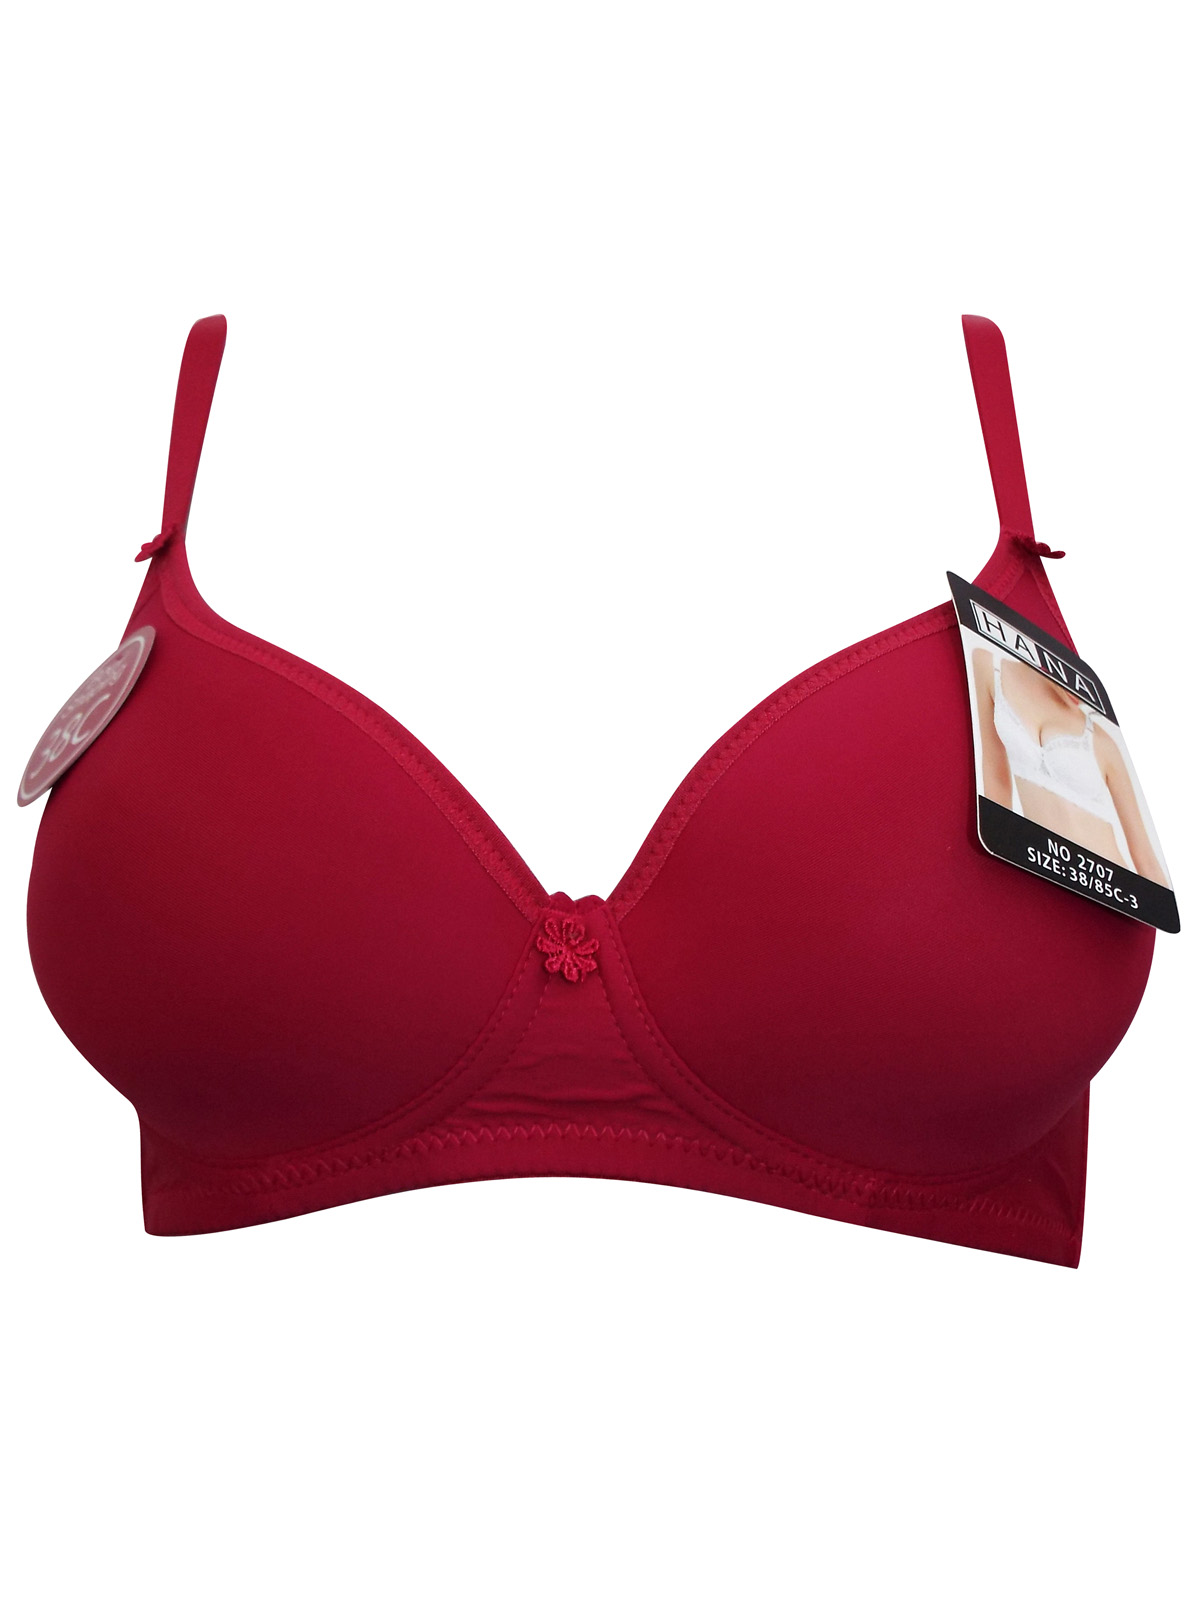 Hana - - Hana CHERRY Padded Full Cup T-Shirt Support Bra - Size 38 to 48 (C  cup)